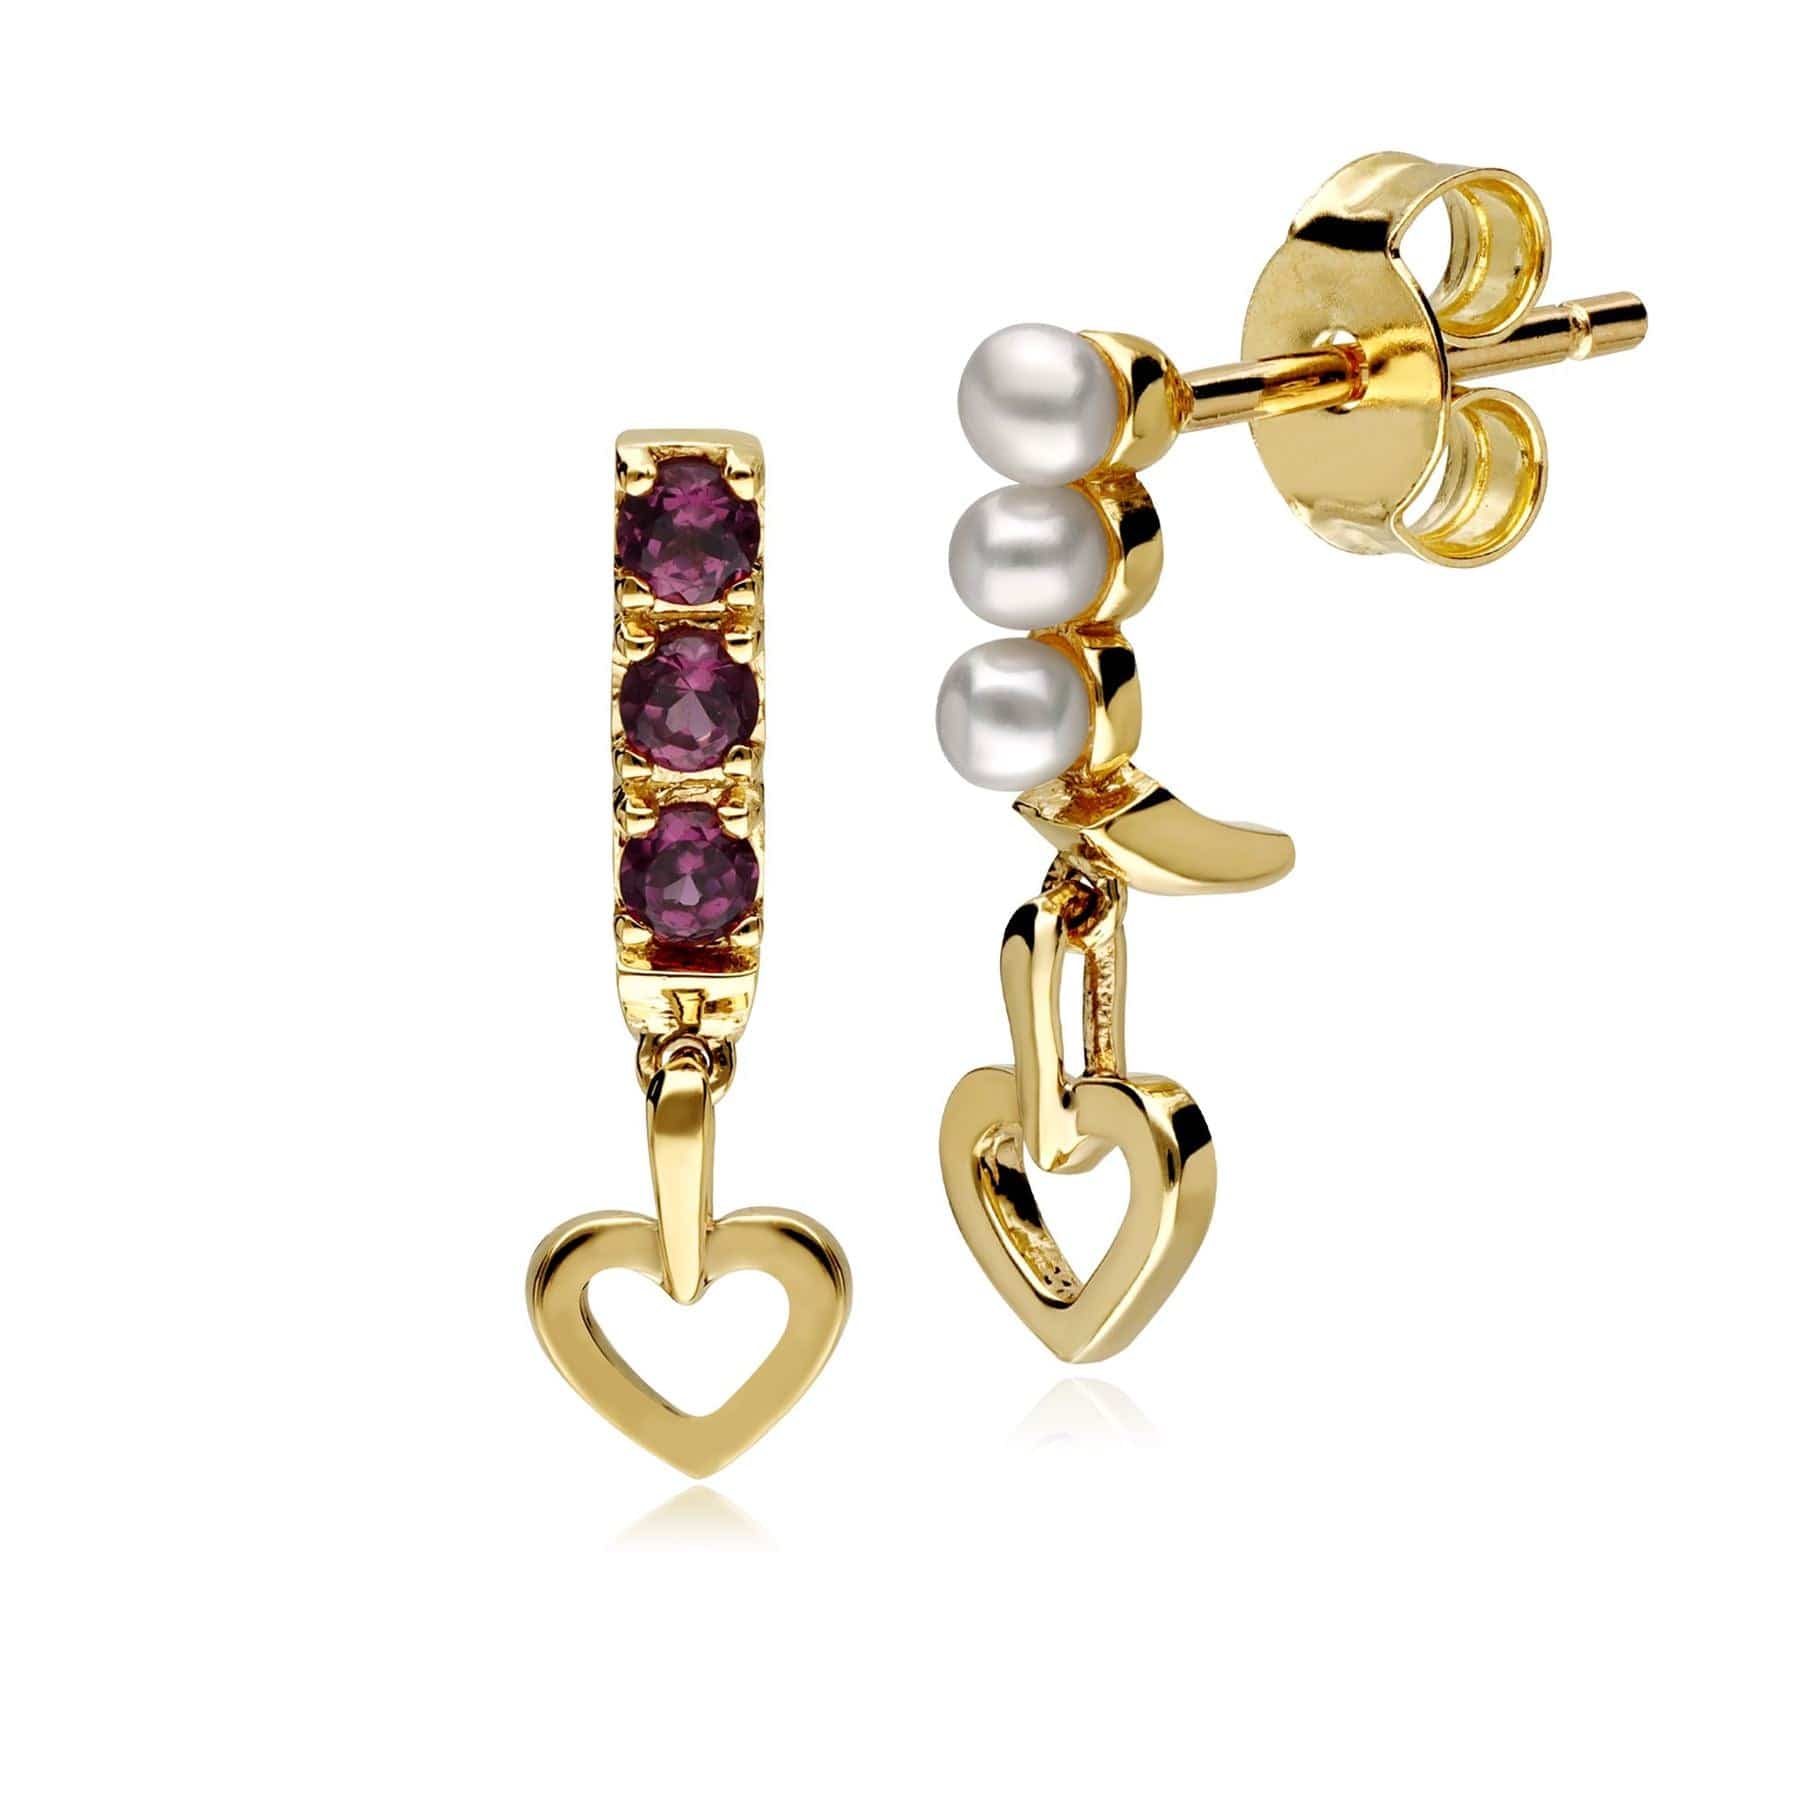 133E4182019 Cultured Freshwater Pearl & Rhodolite Mismatched Heart Drop Earrings In 9ct Yellow Gold 4